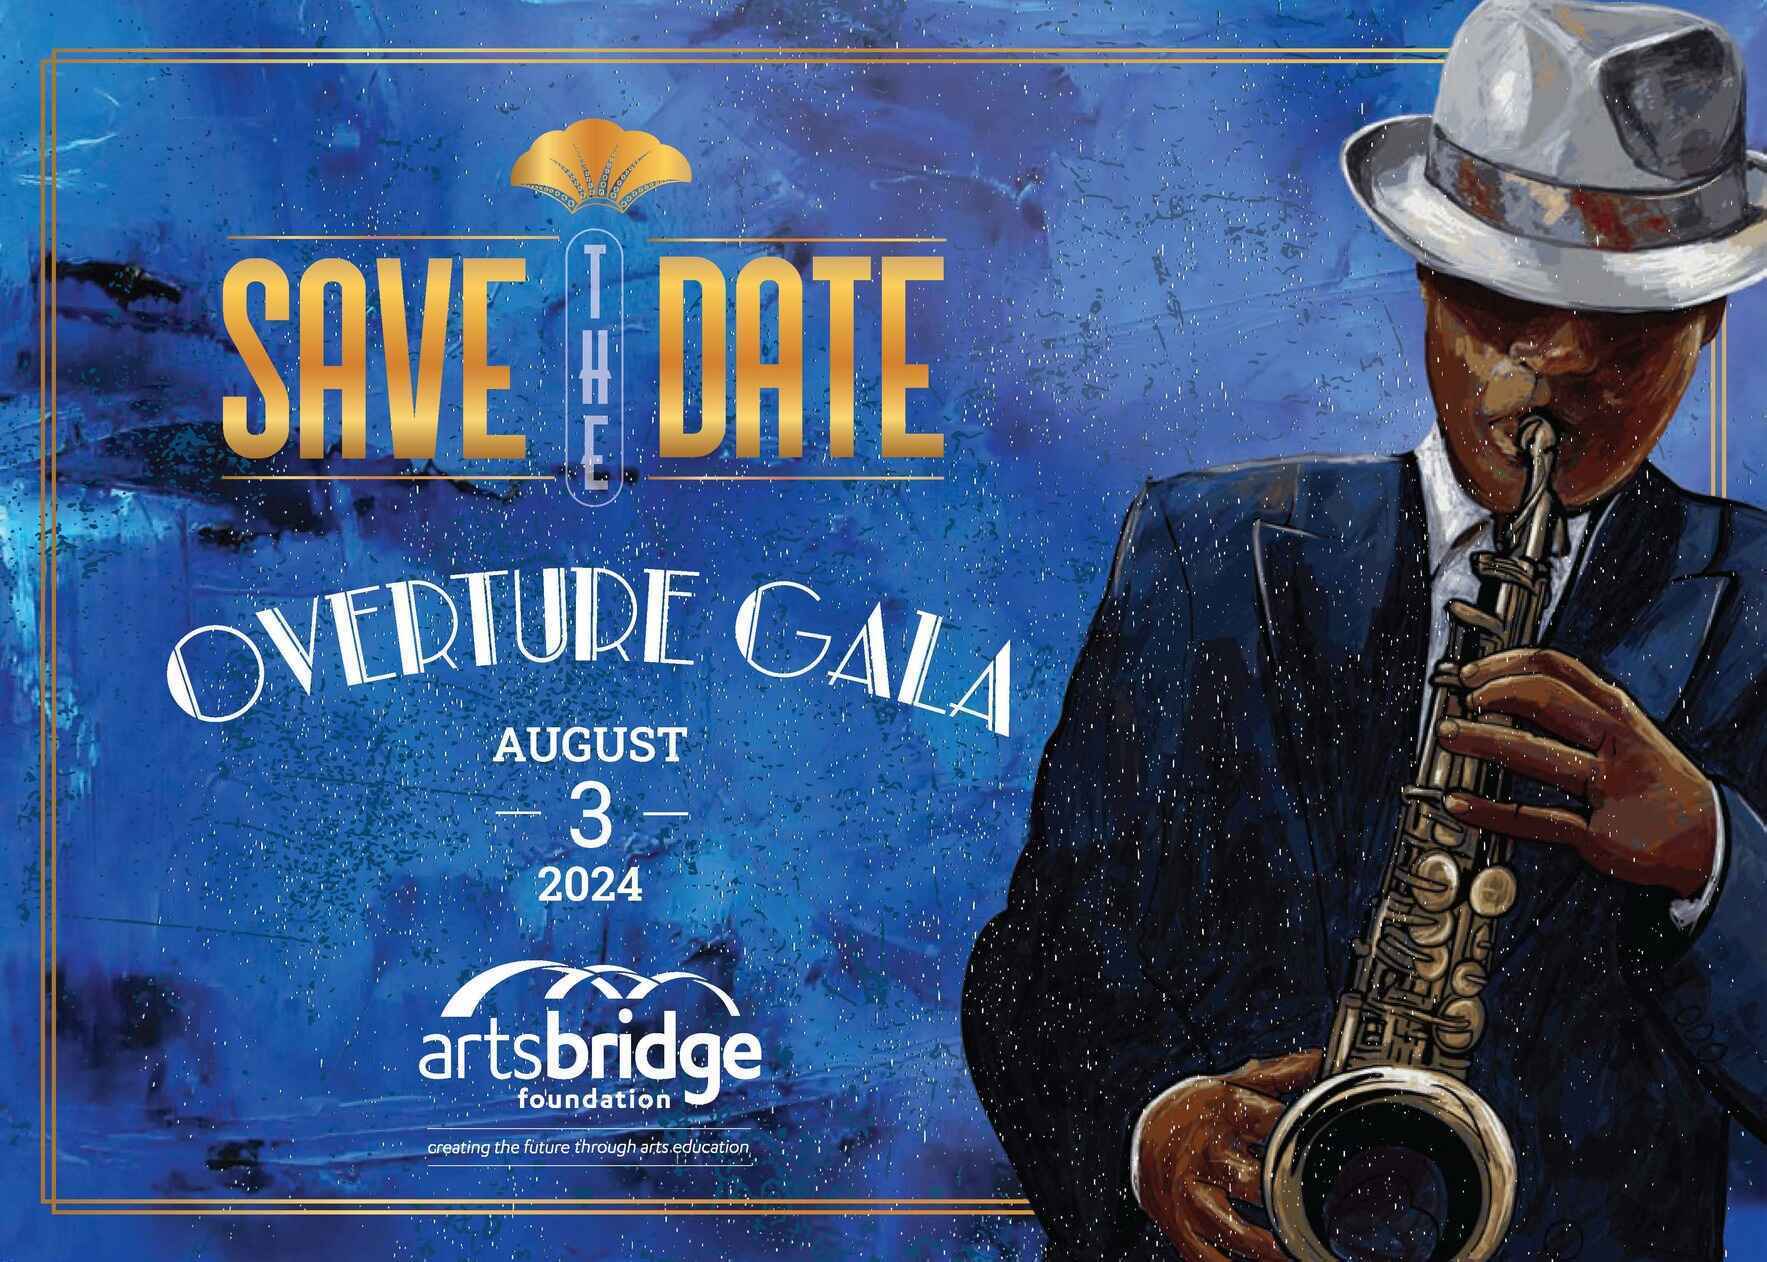 Overture Gala - A Night at the At The Cabaret